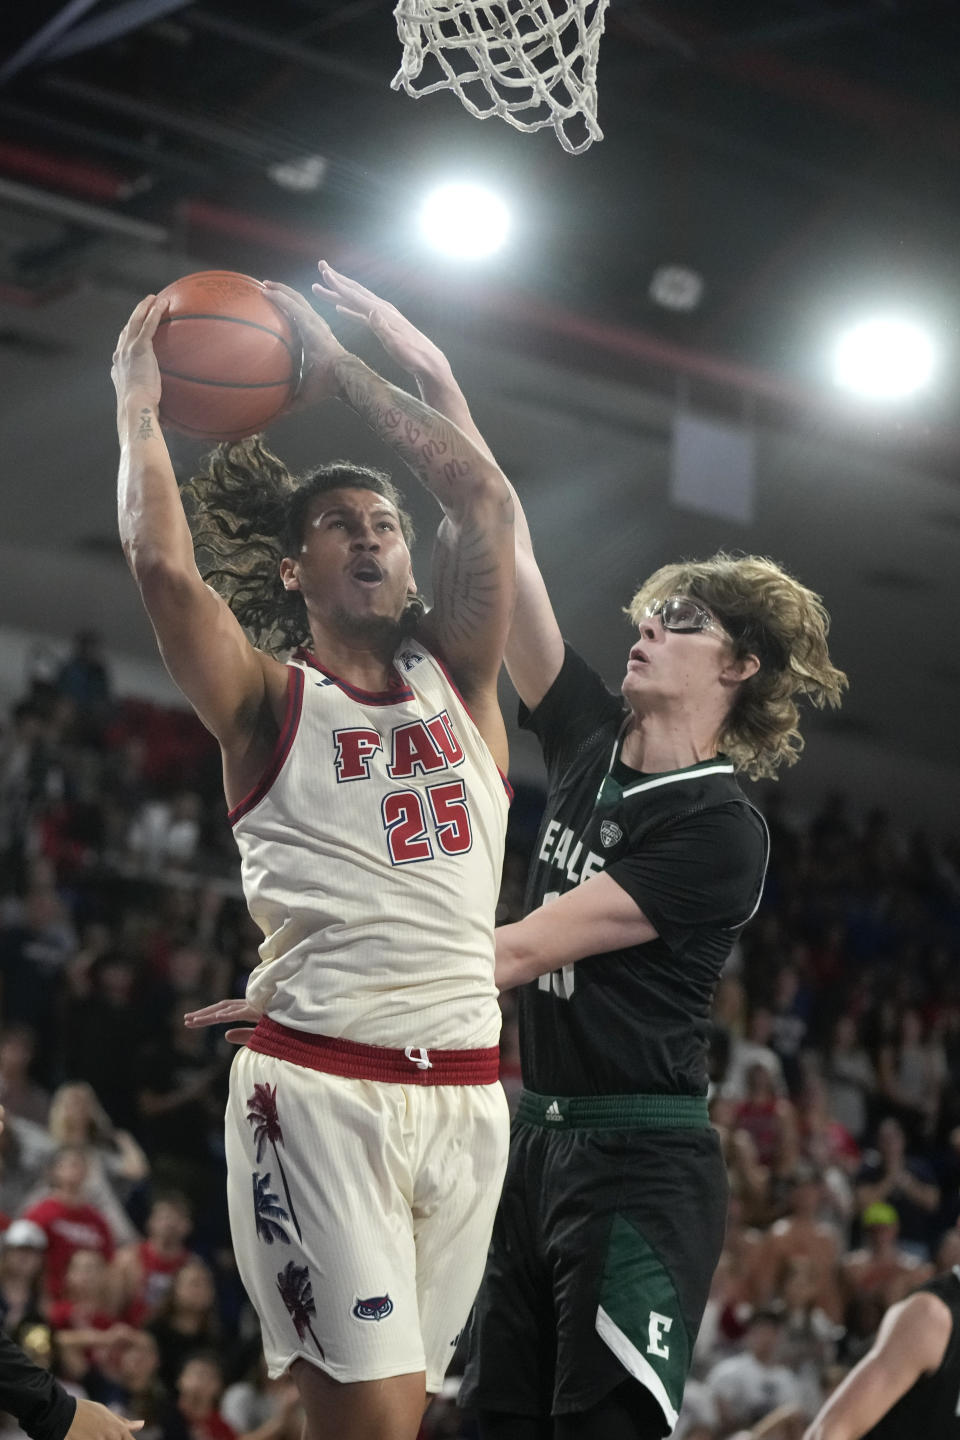 Florida Atlantic forward Tre Carroll (25) goes to the basket while defended by Eastern Michigan forward Derik Pranger (15) during the second half of an NCAA college basketball game Tuesday, Nov. 14, 2023, in Boca Raton, Fla. (AP Photo/Rebecca Blackwell)